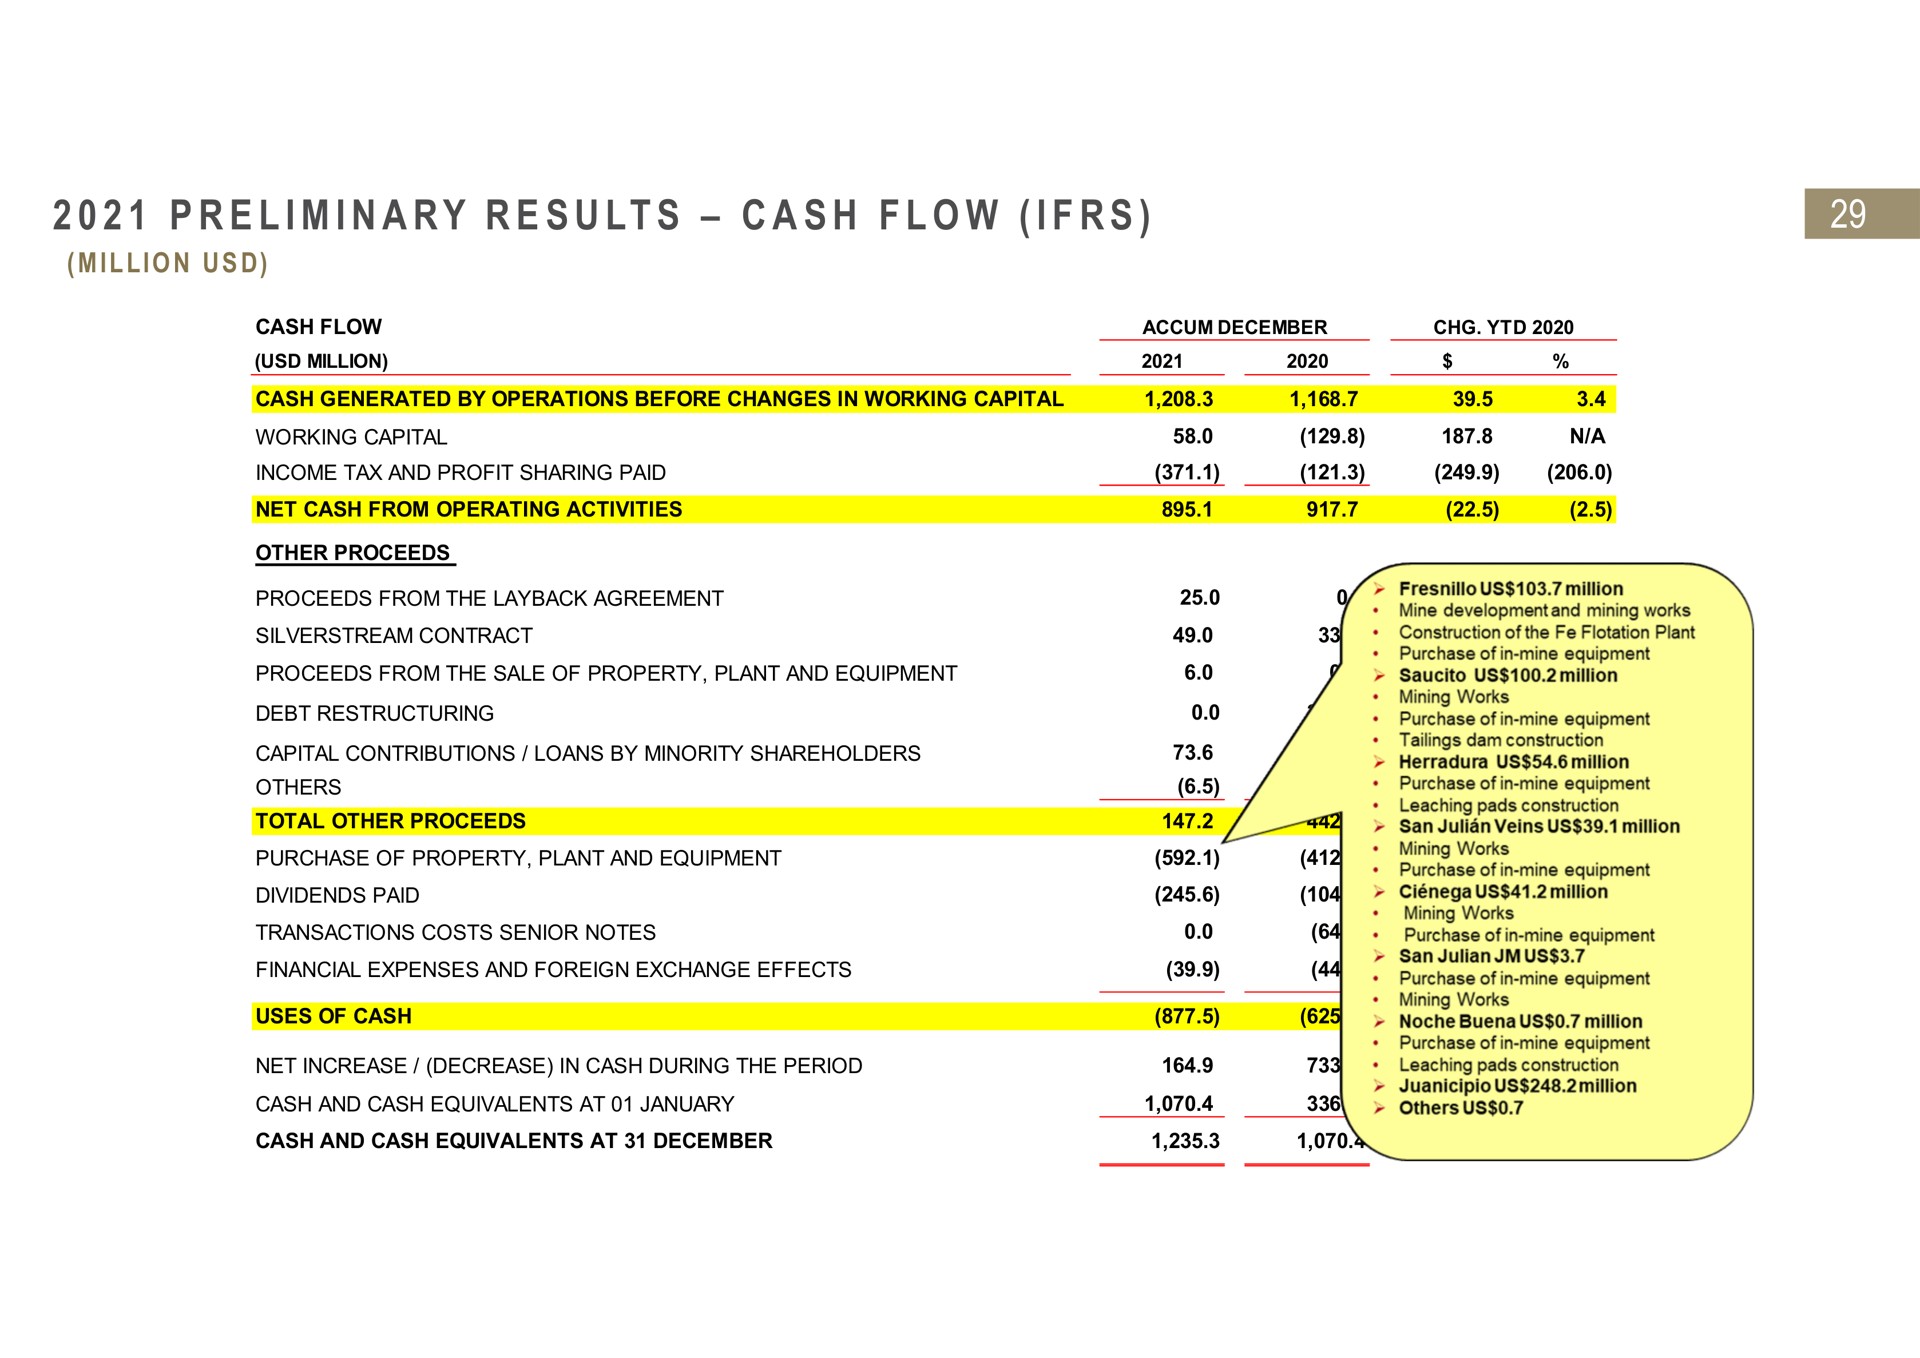 i i a a i preliminary results cash flow million capital contributions loans by minority shareholders financial expenses and foreign exchange effects as fae avian | Fresnillo